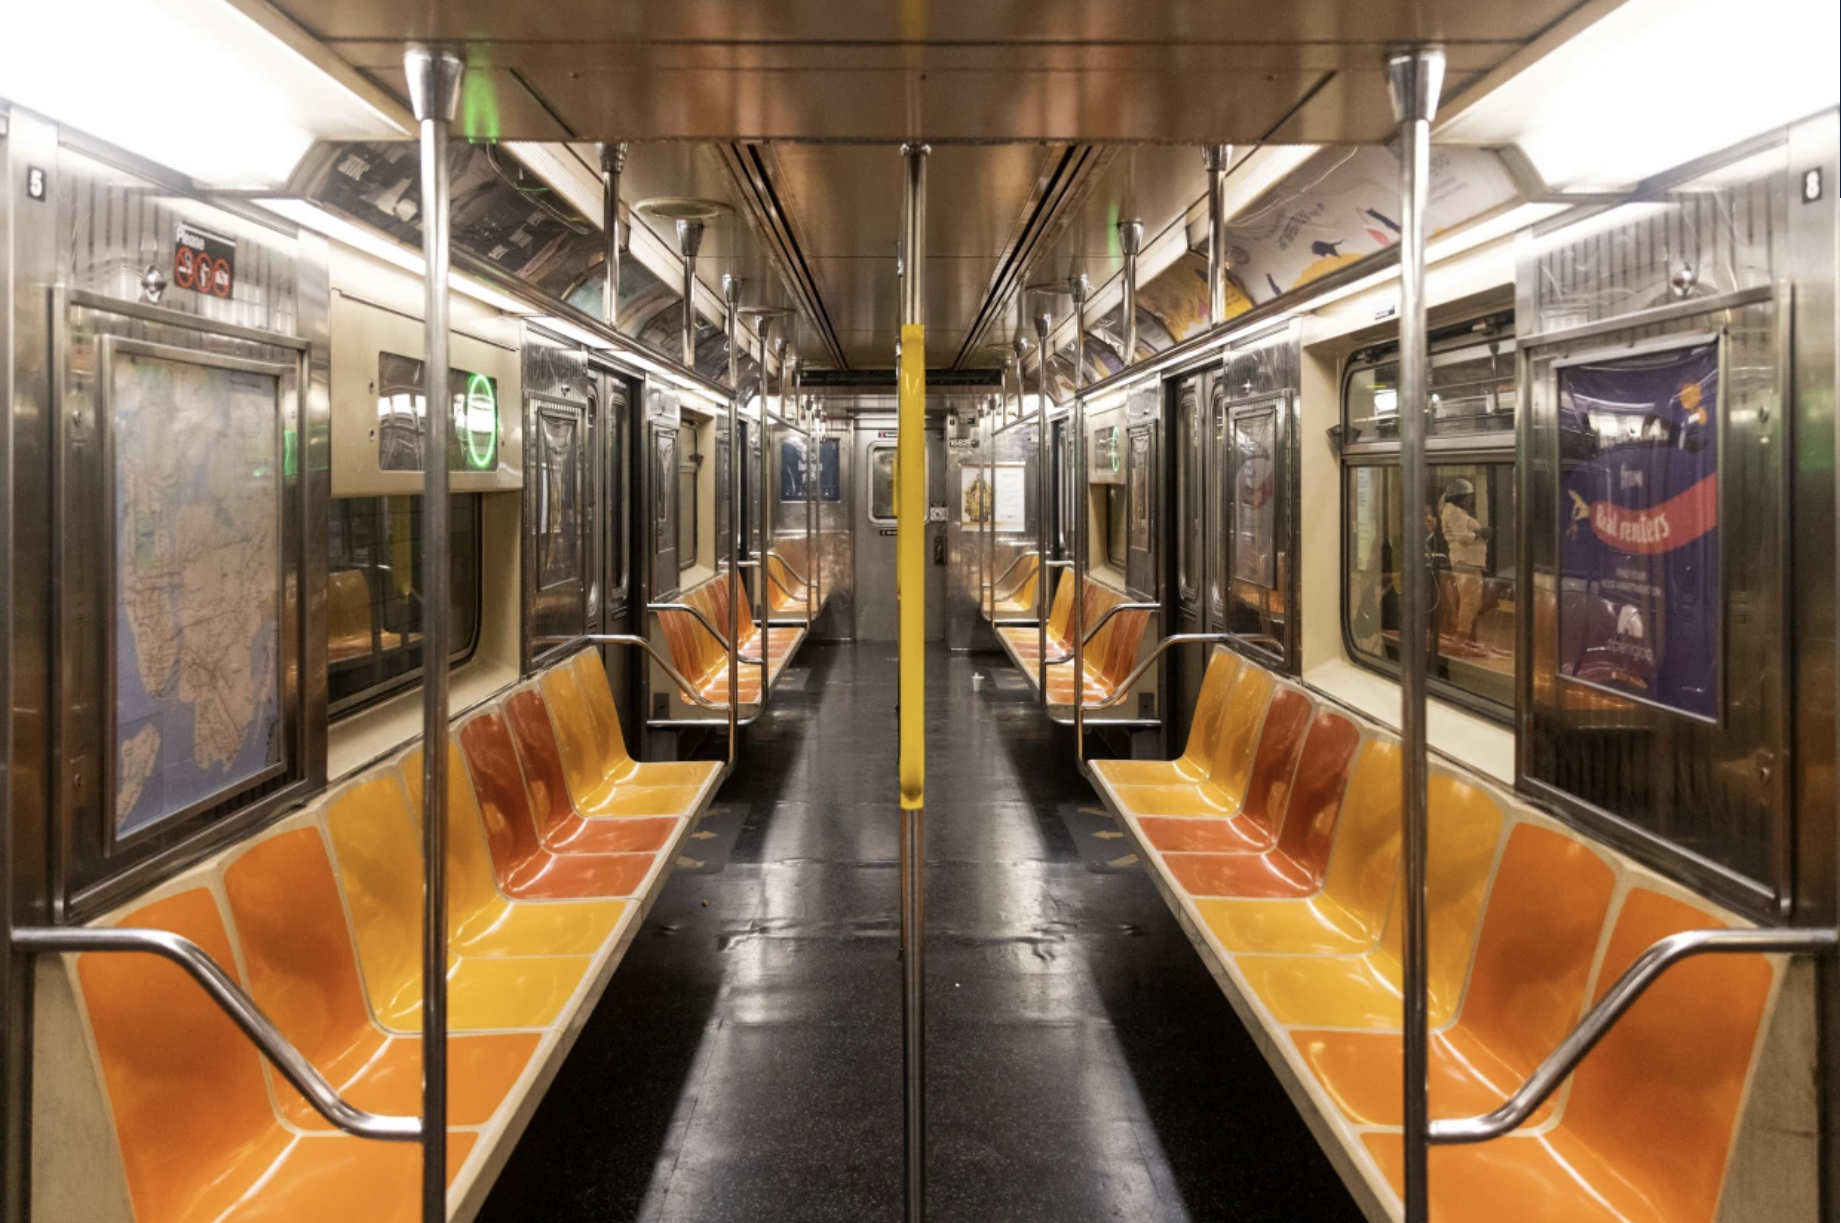 New York to install surveillance cameras in every subway car 